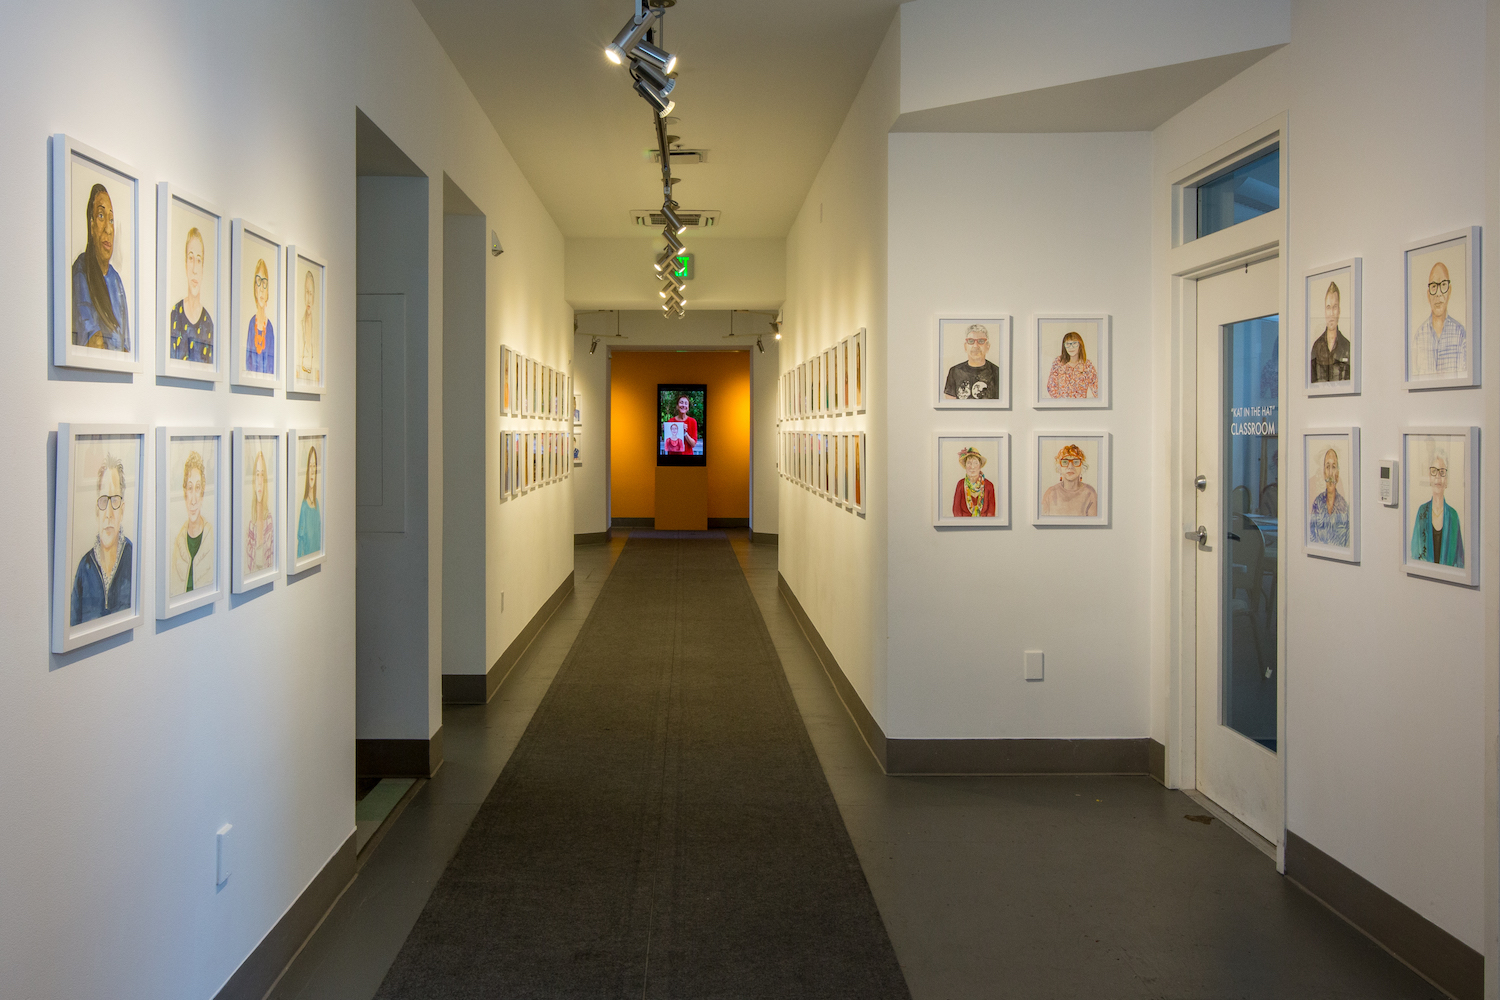 101 portraits on display in a gallery